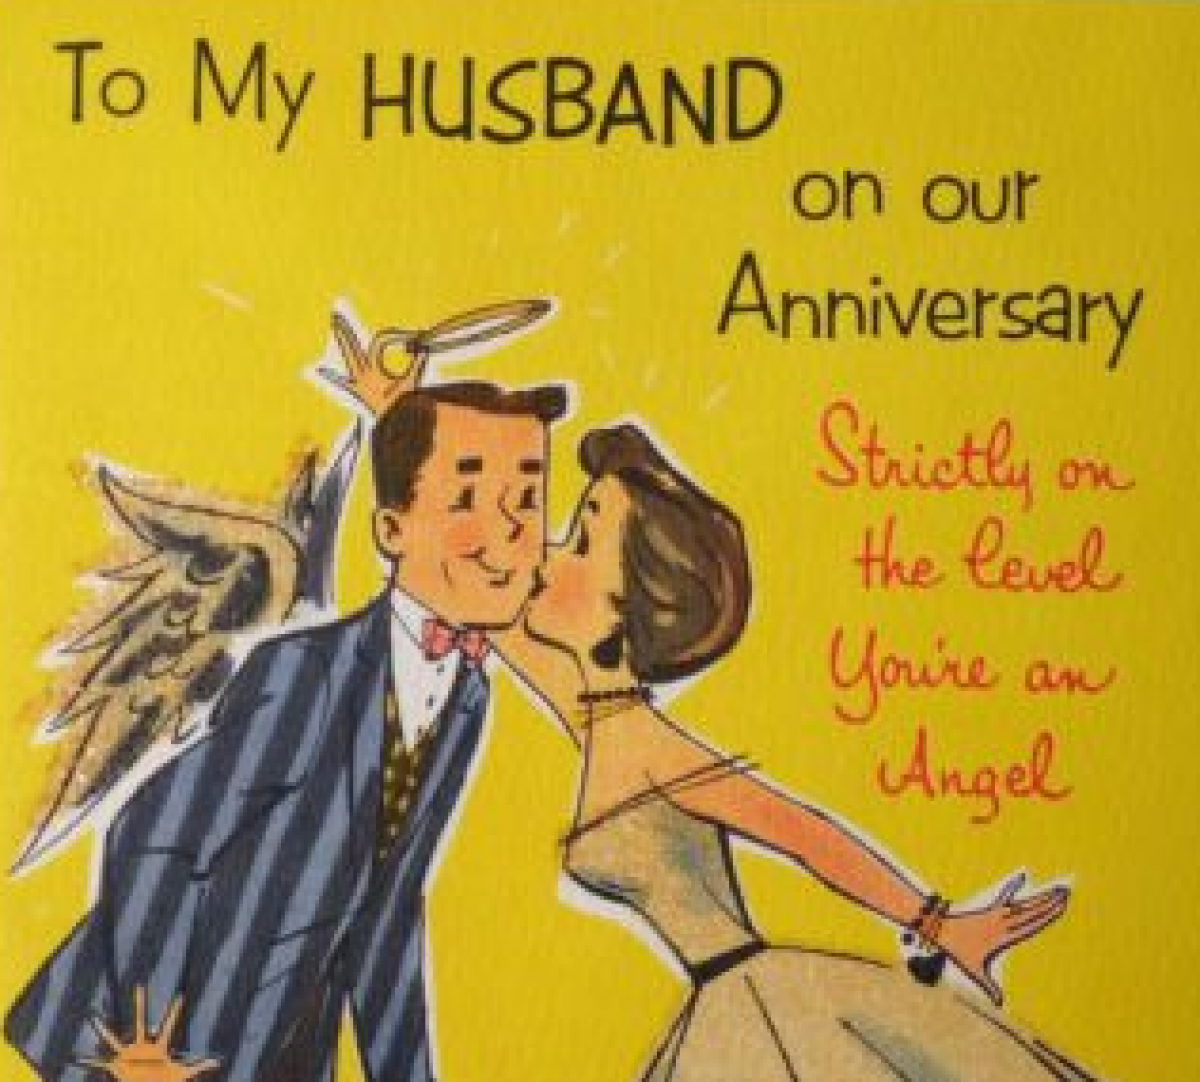 HUSBAND Funny ANNIVERSARY Wedding Greetings Card Best Decision.